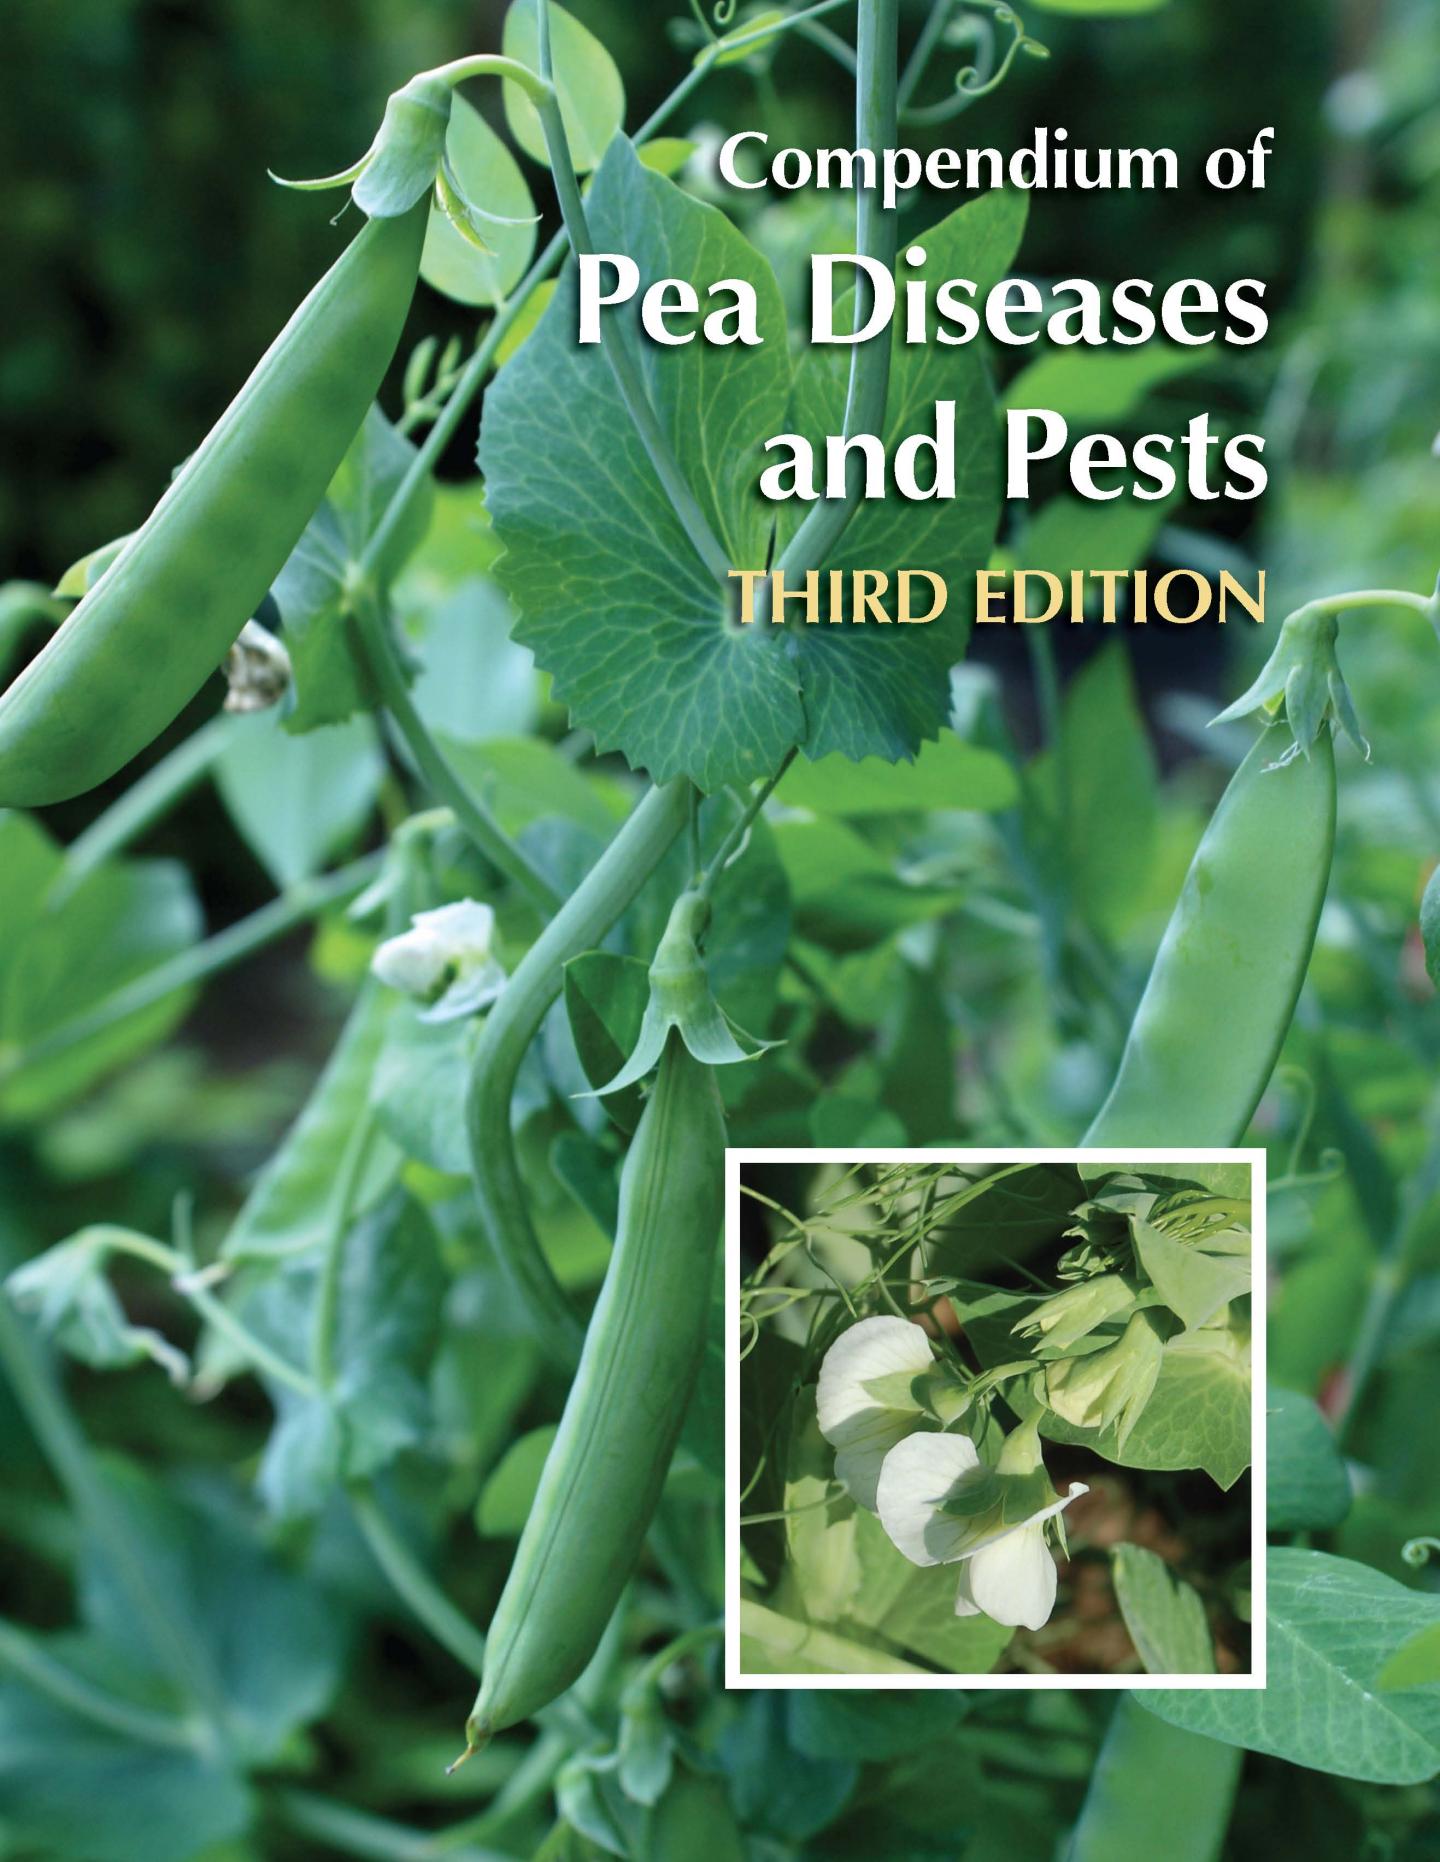 Compendium of Pea Diseases and Pests, Third Edition